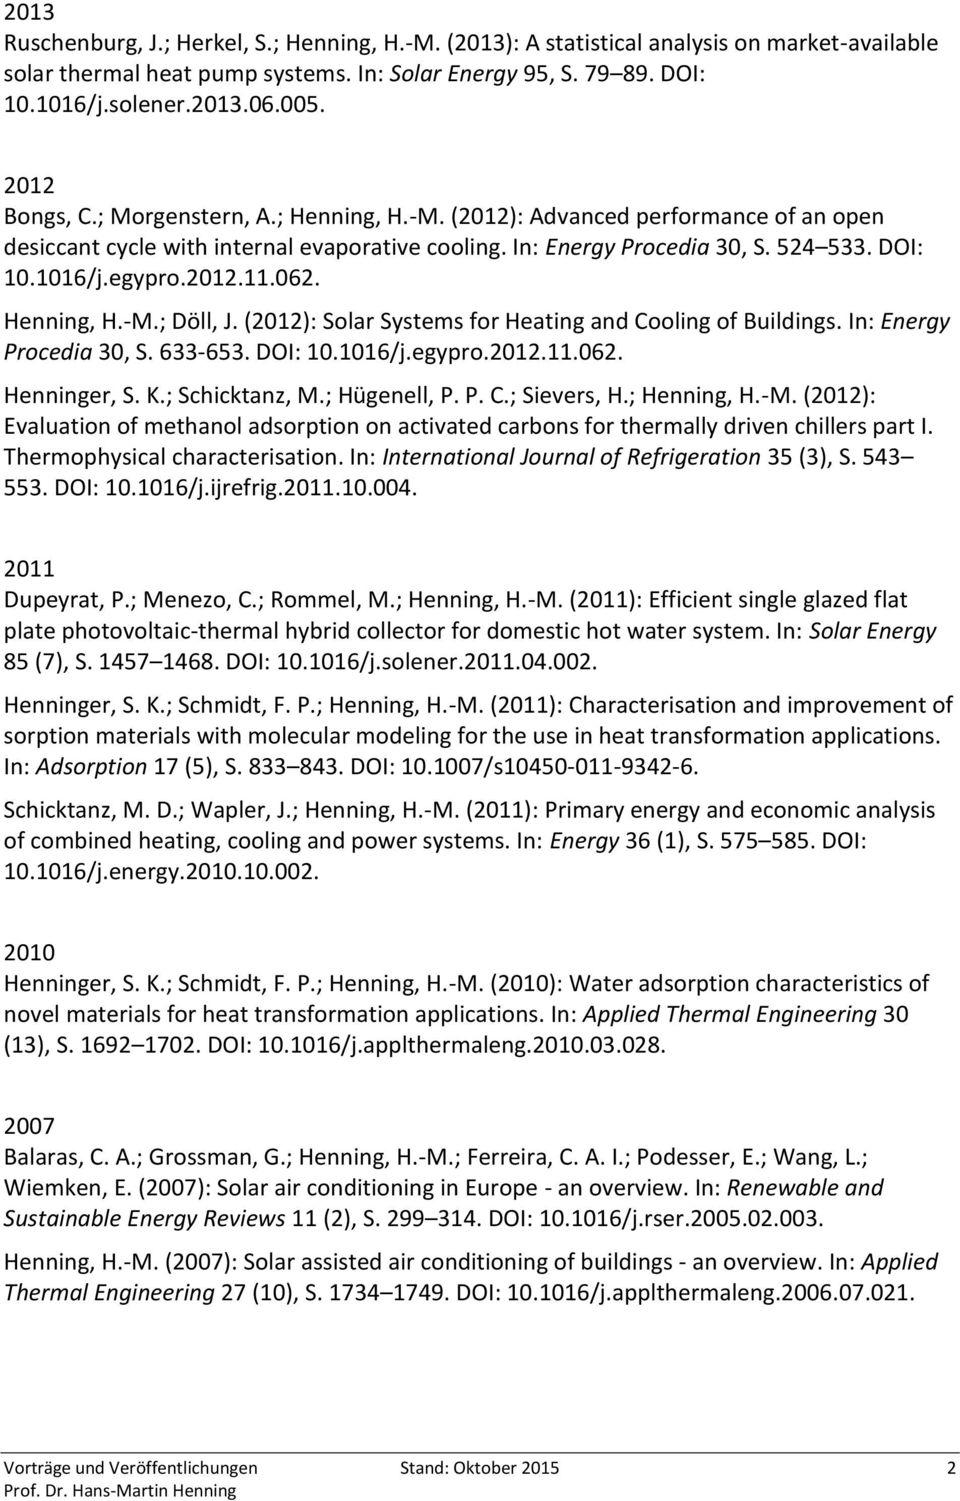 2012.11.062. Henning, H.-M.; Döll, J. (2012): Solar Systems for Heating and Cooling of Buildings. In: Energy Procedia 30, S. 633-653. DOI: 10.1016/j.egypro.2012.11.062. Henninger, S. K.